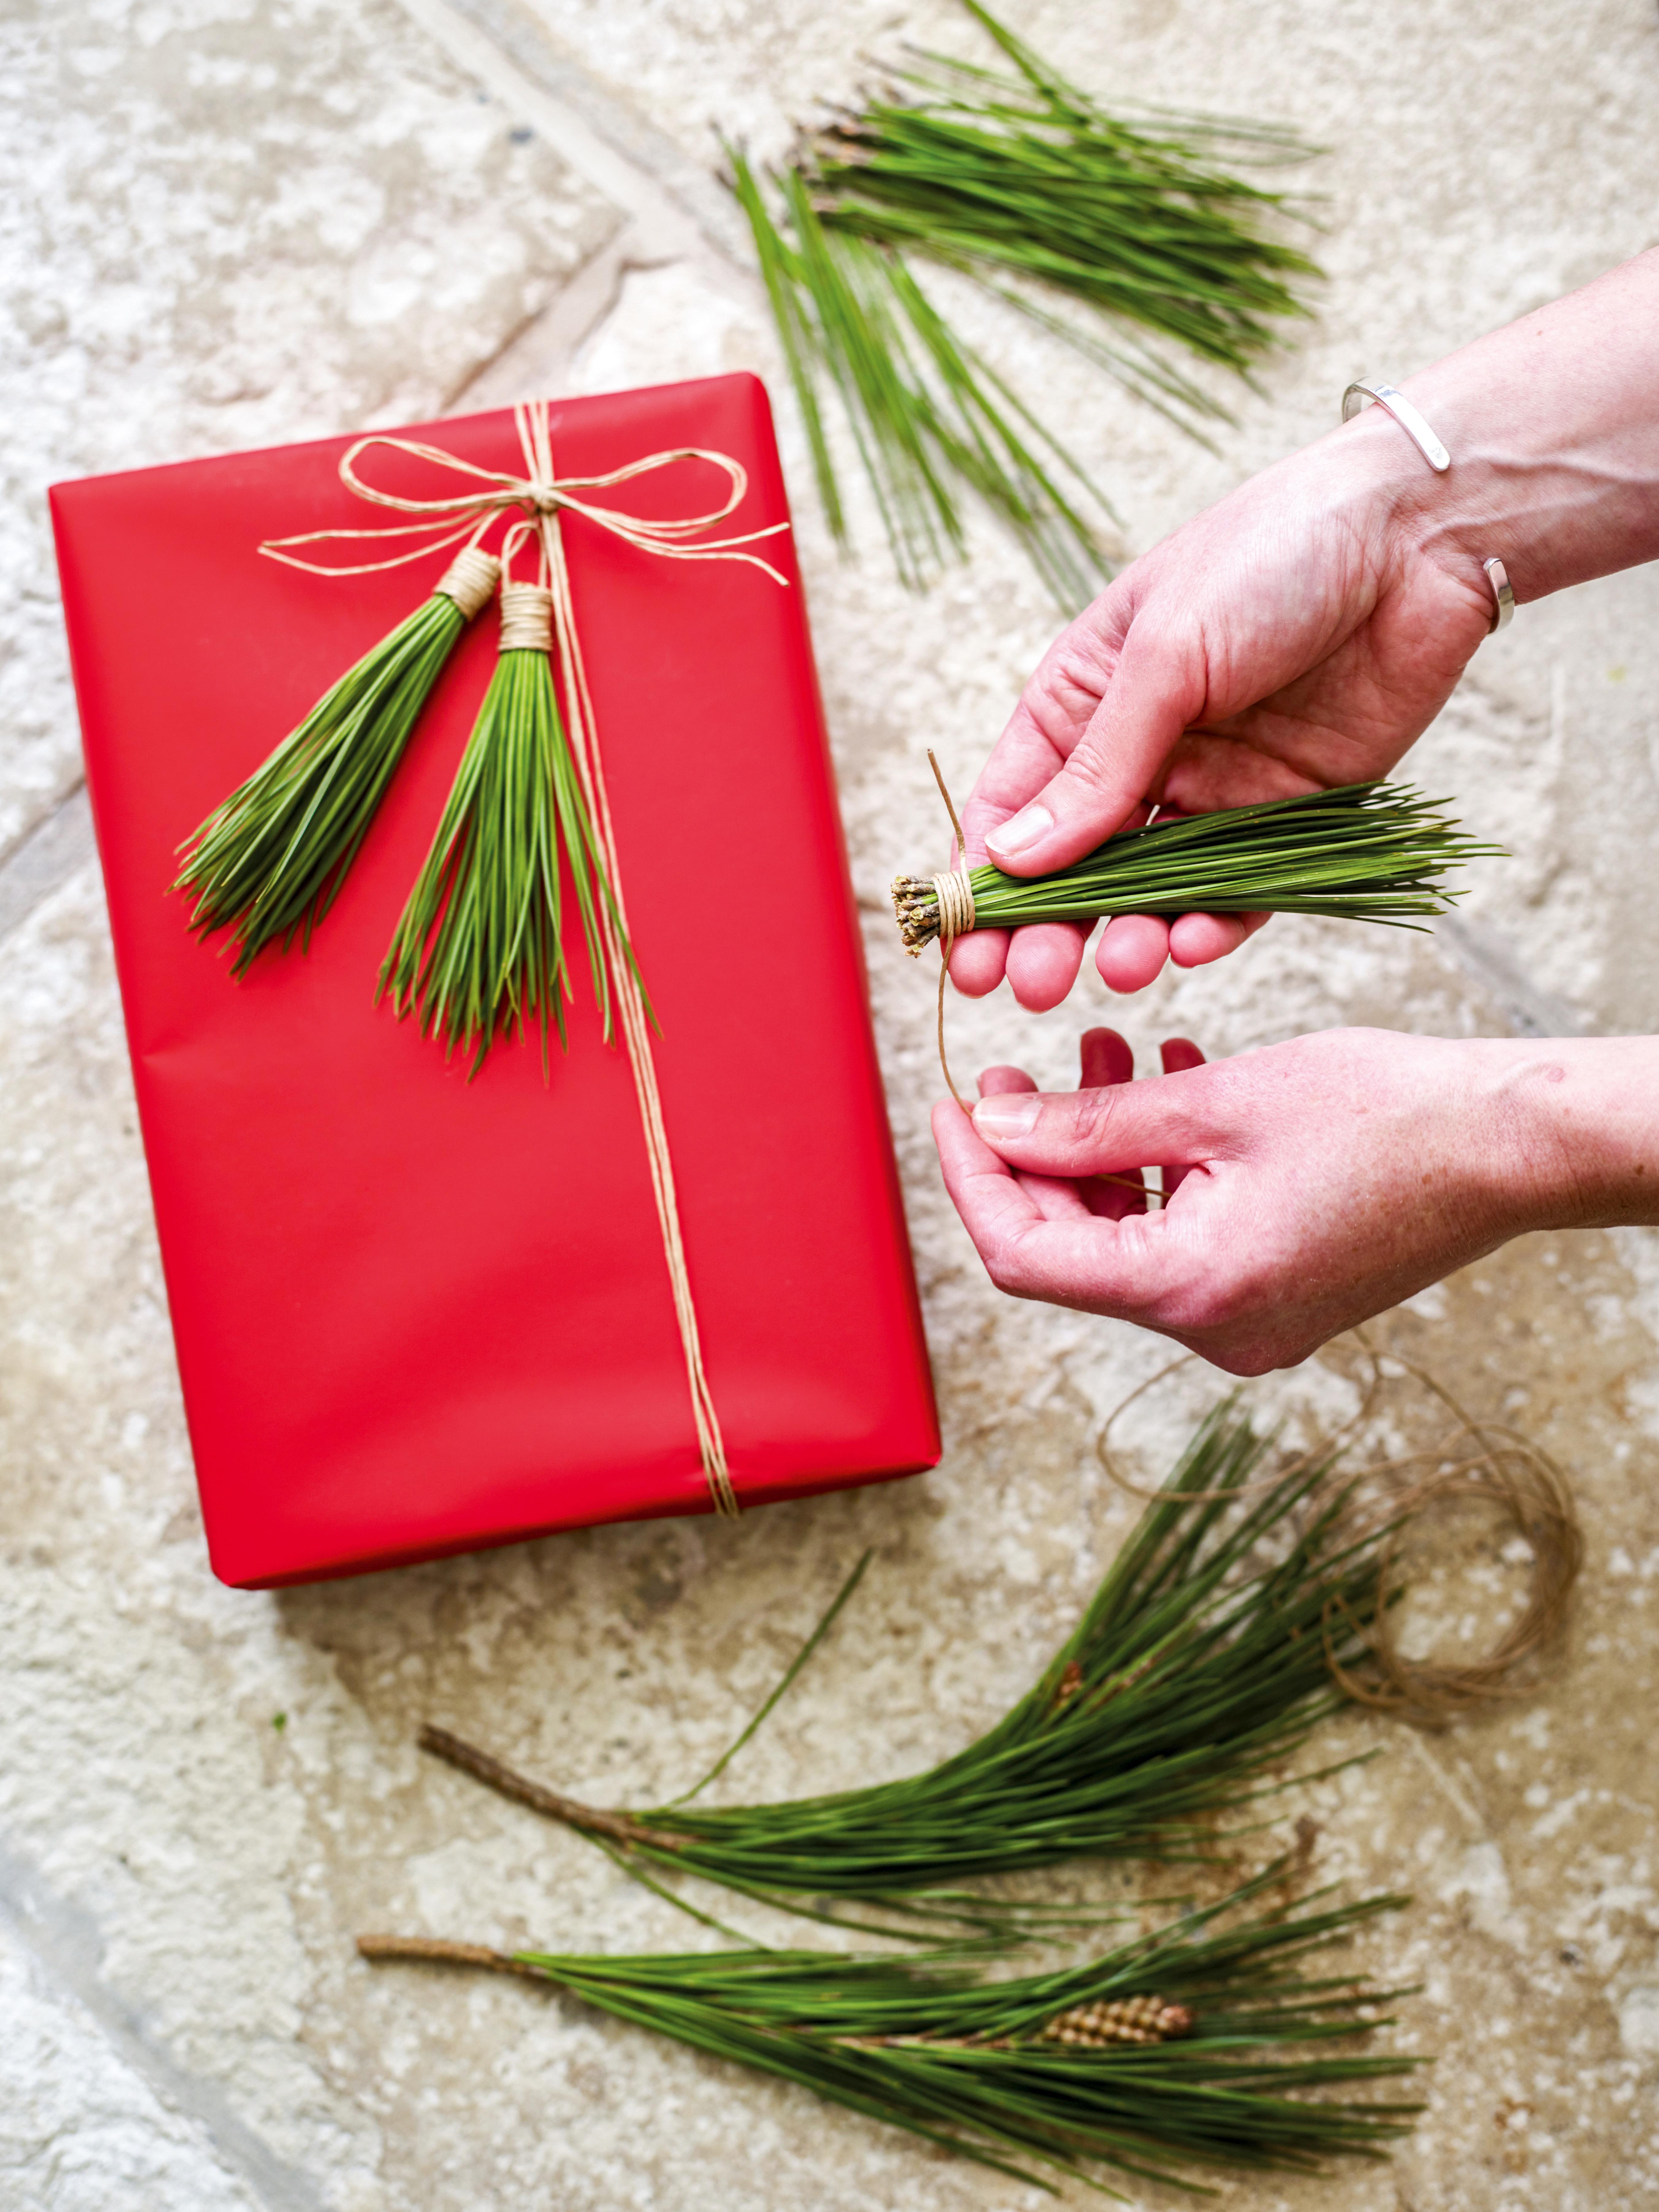 Gift wrapping Christmas presents with natural materials - Gardens  Illustrated